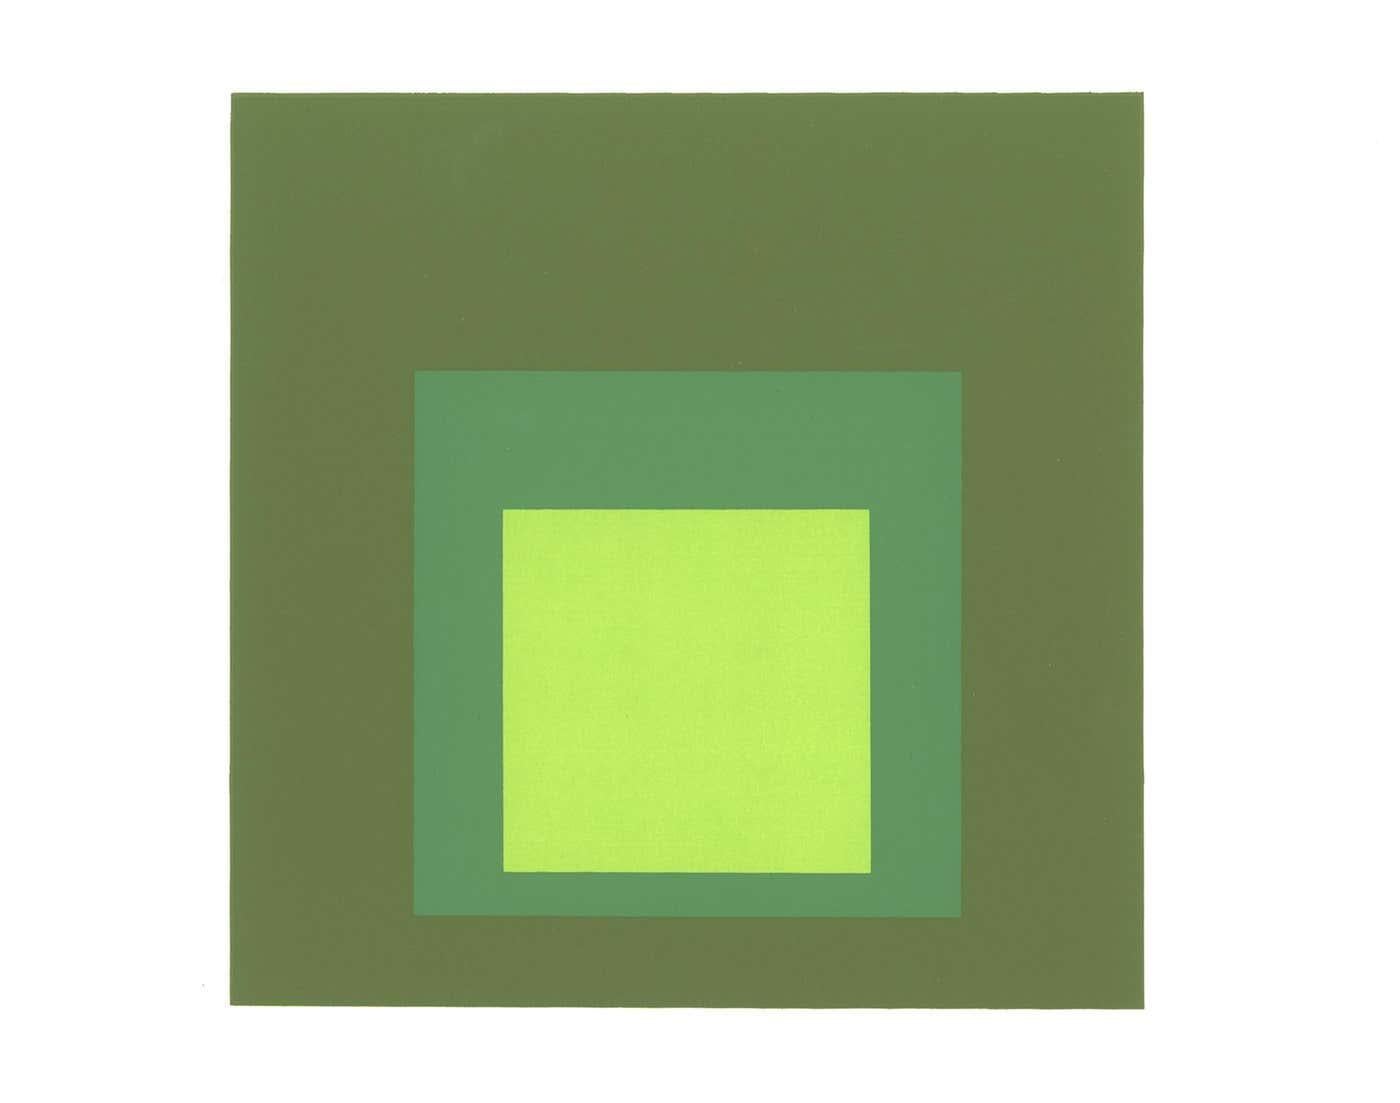 Josef Albers Homage to the Square 1964 (set of 4 printed works)  - Abstract Print by (after) Josef Albers